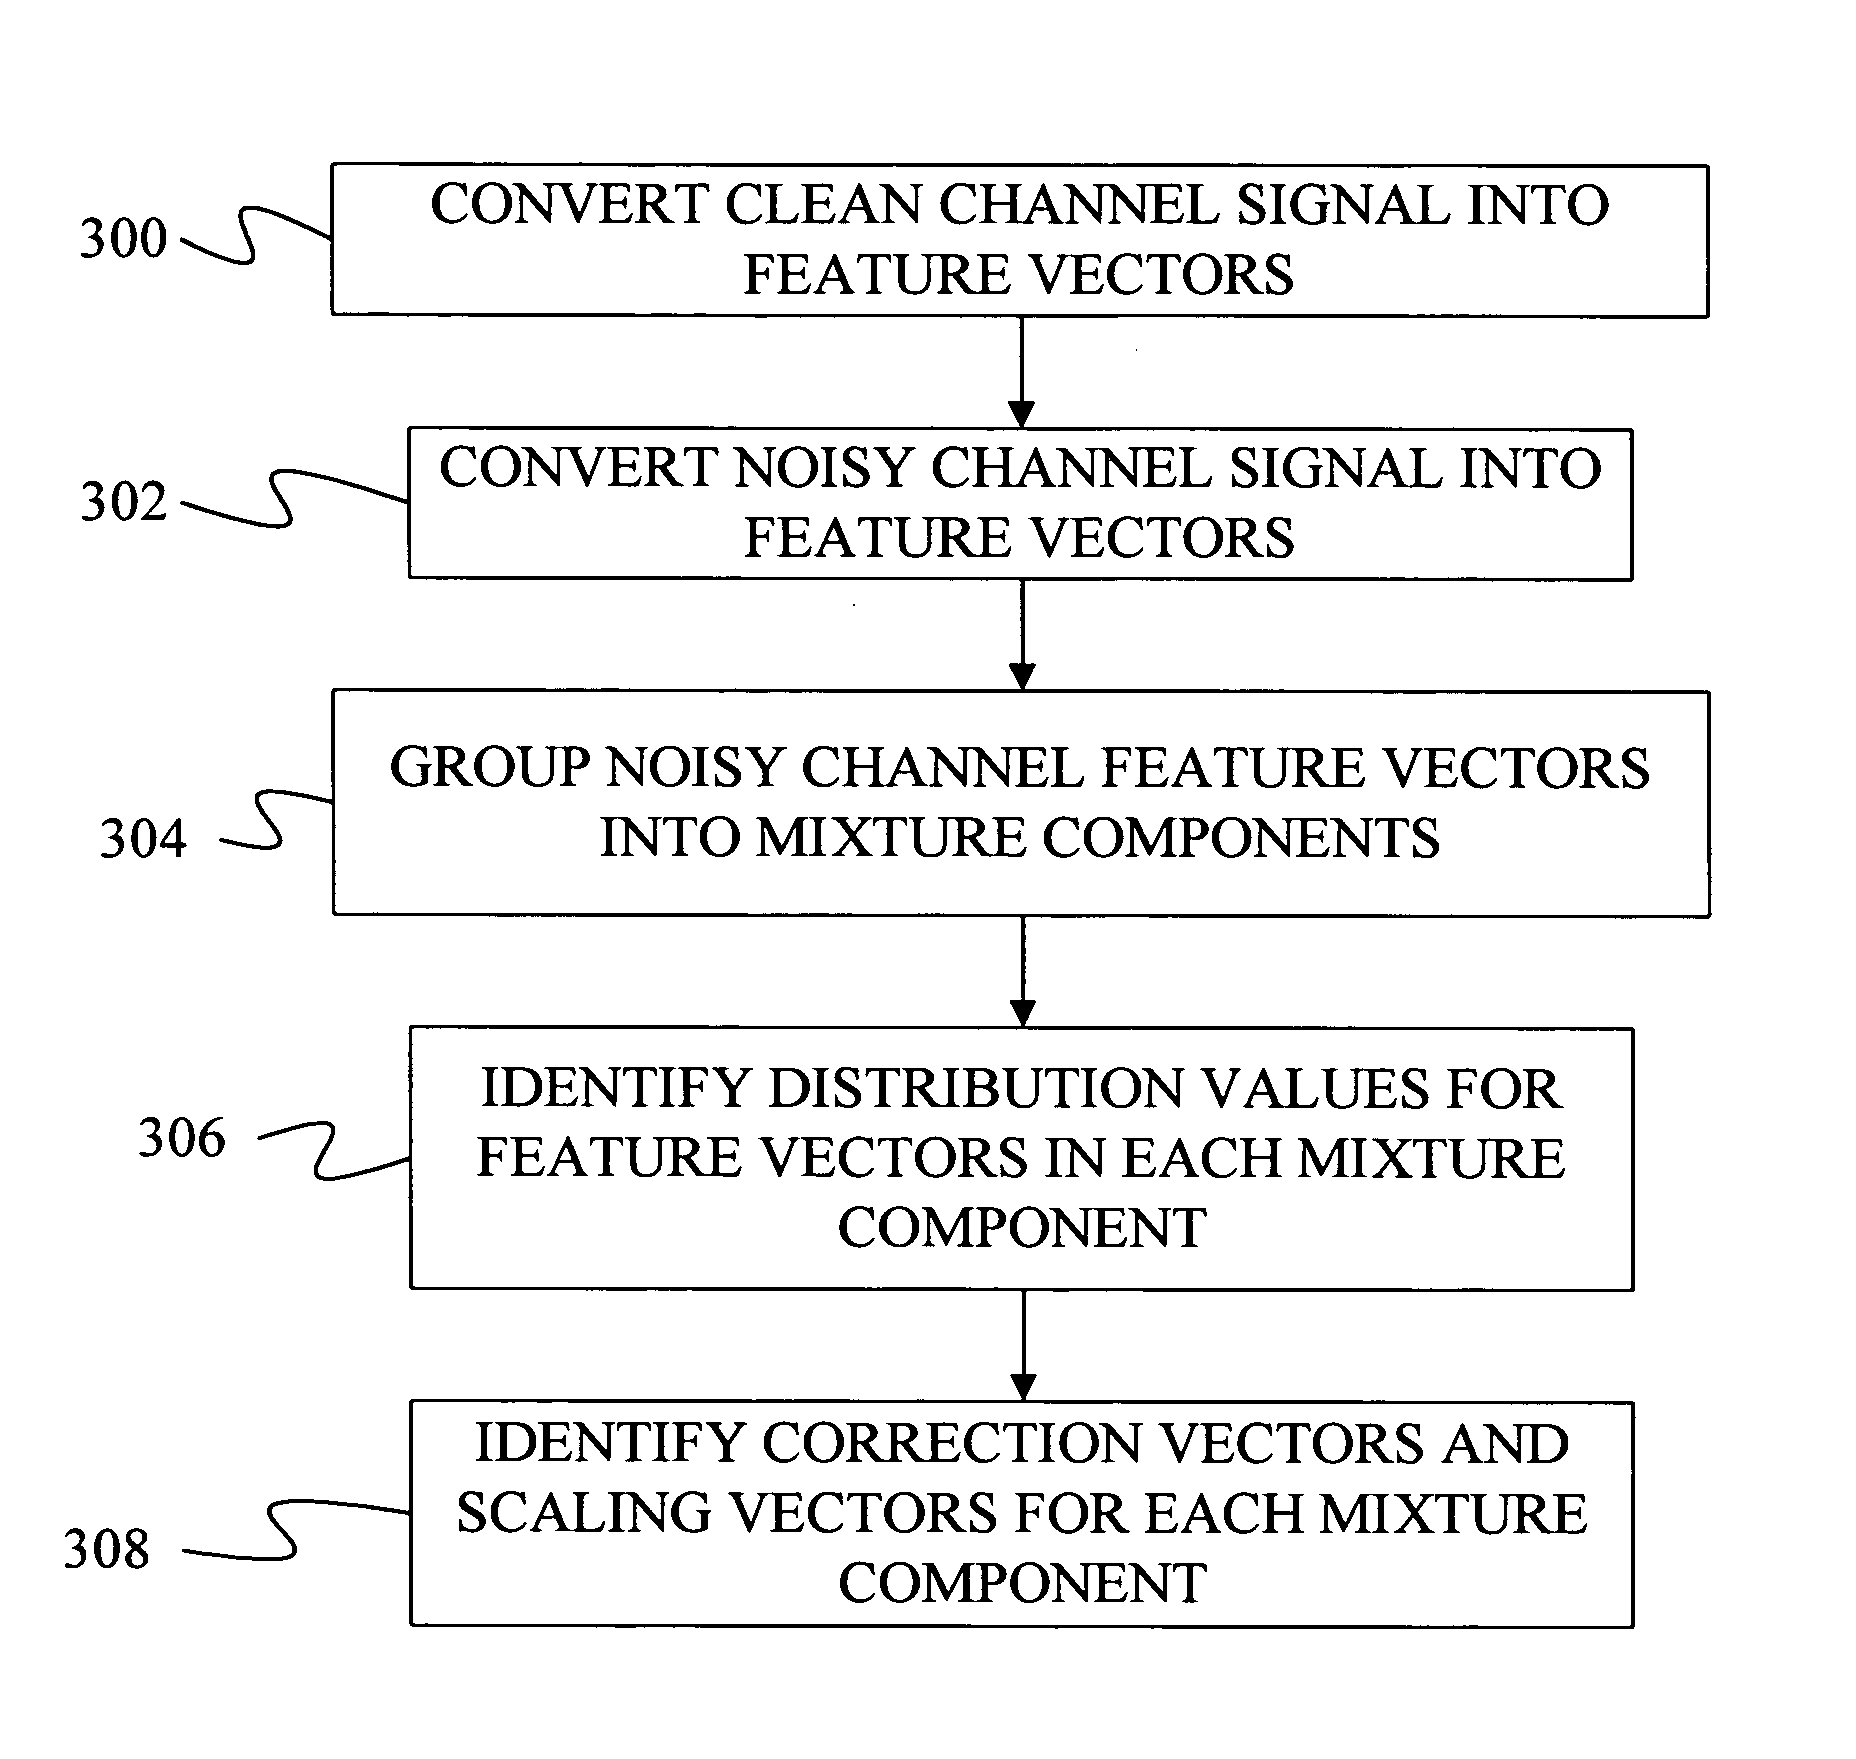 Method of noise reduction using correction and scaling vectors with partitioning of the acoustic space in the domain of noisy speech